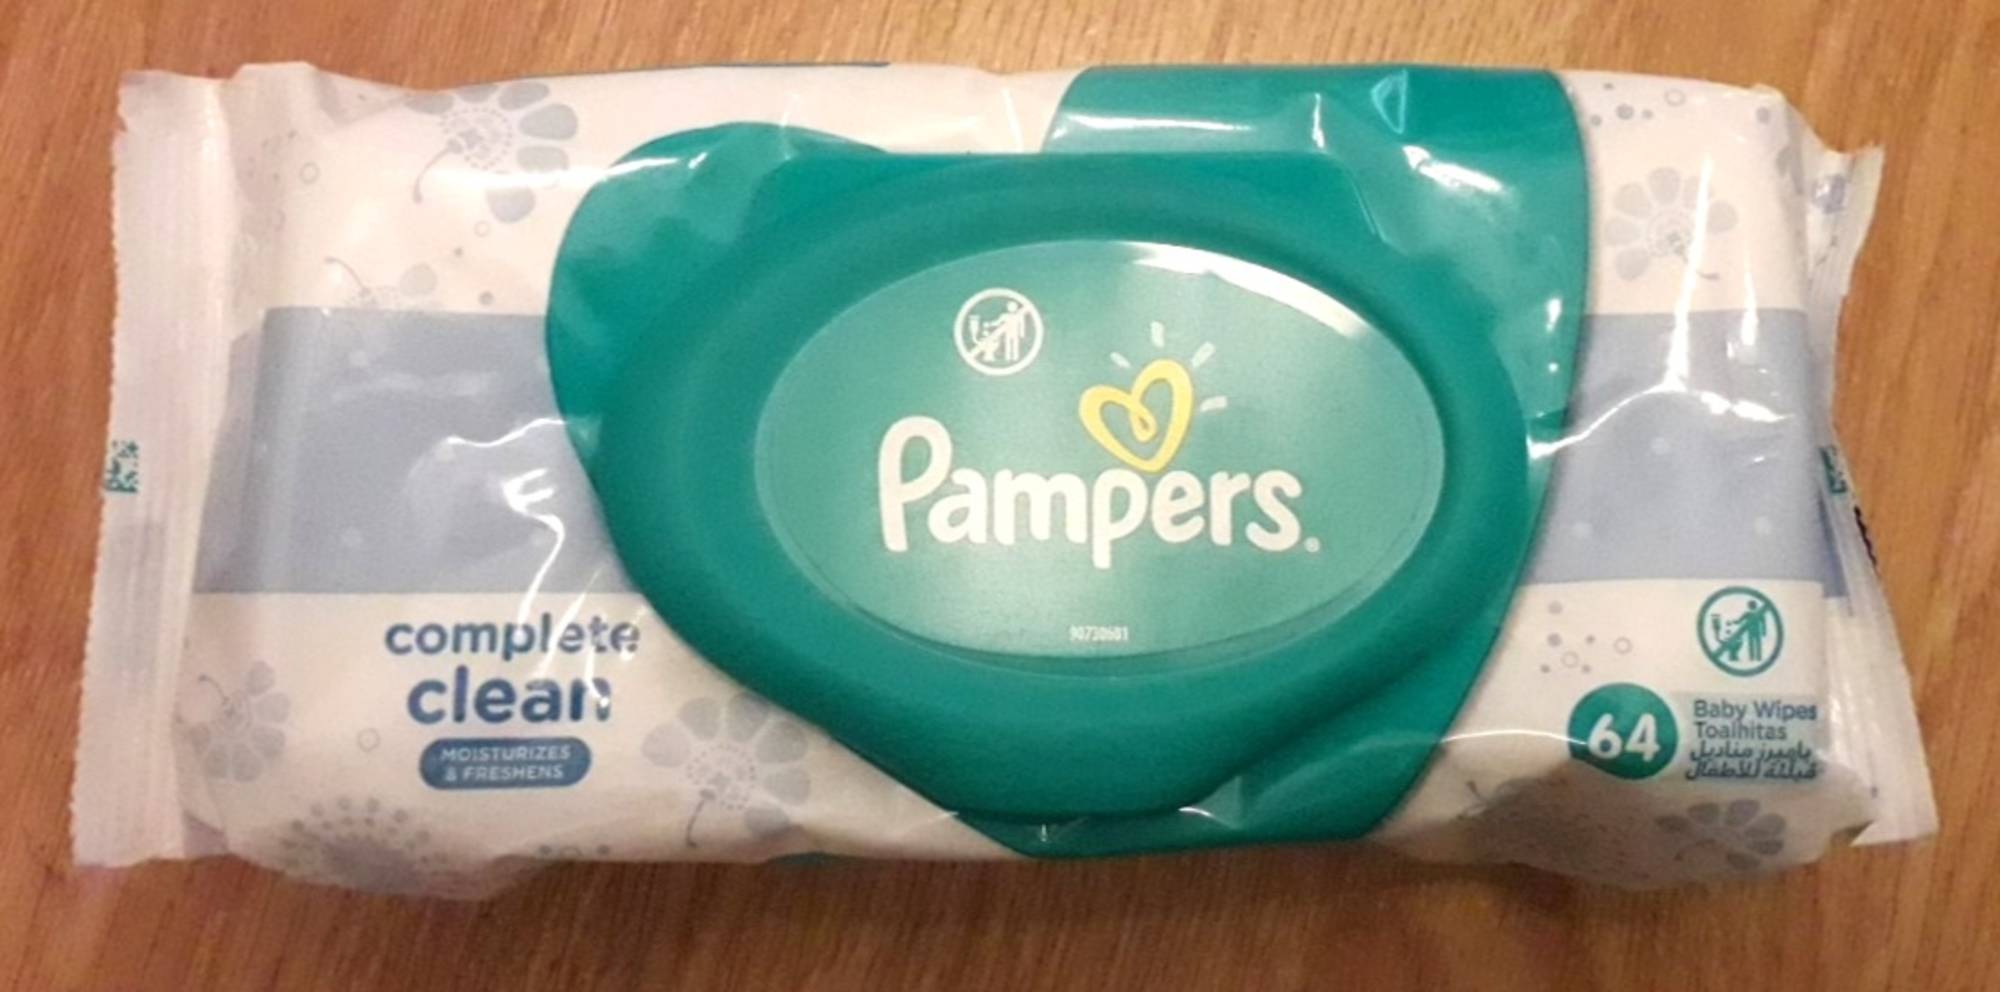 PAMPERS - Complete clean - 64 Baby wipes